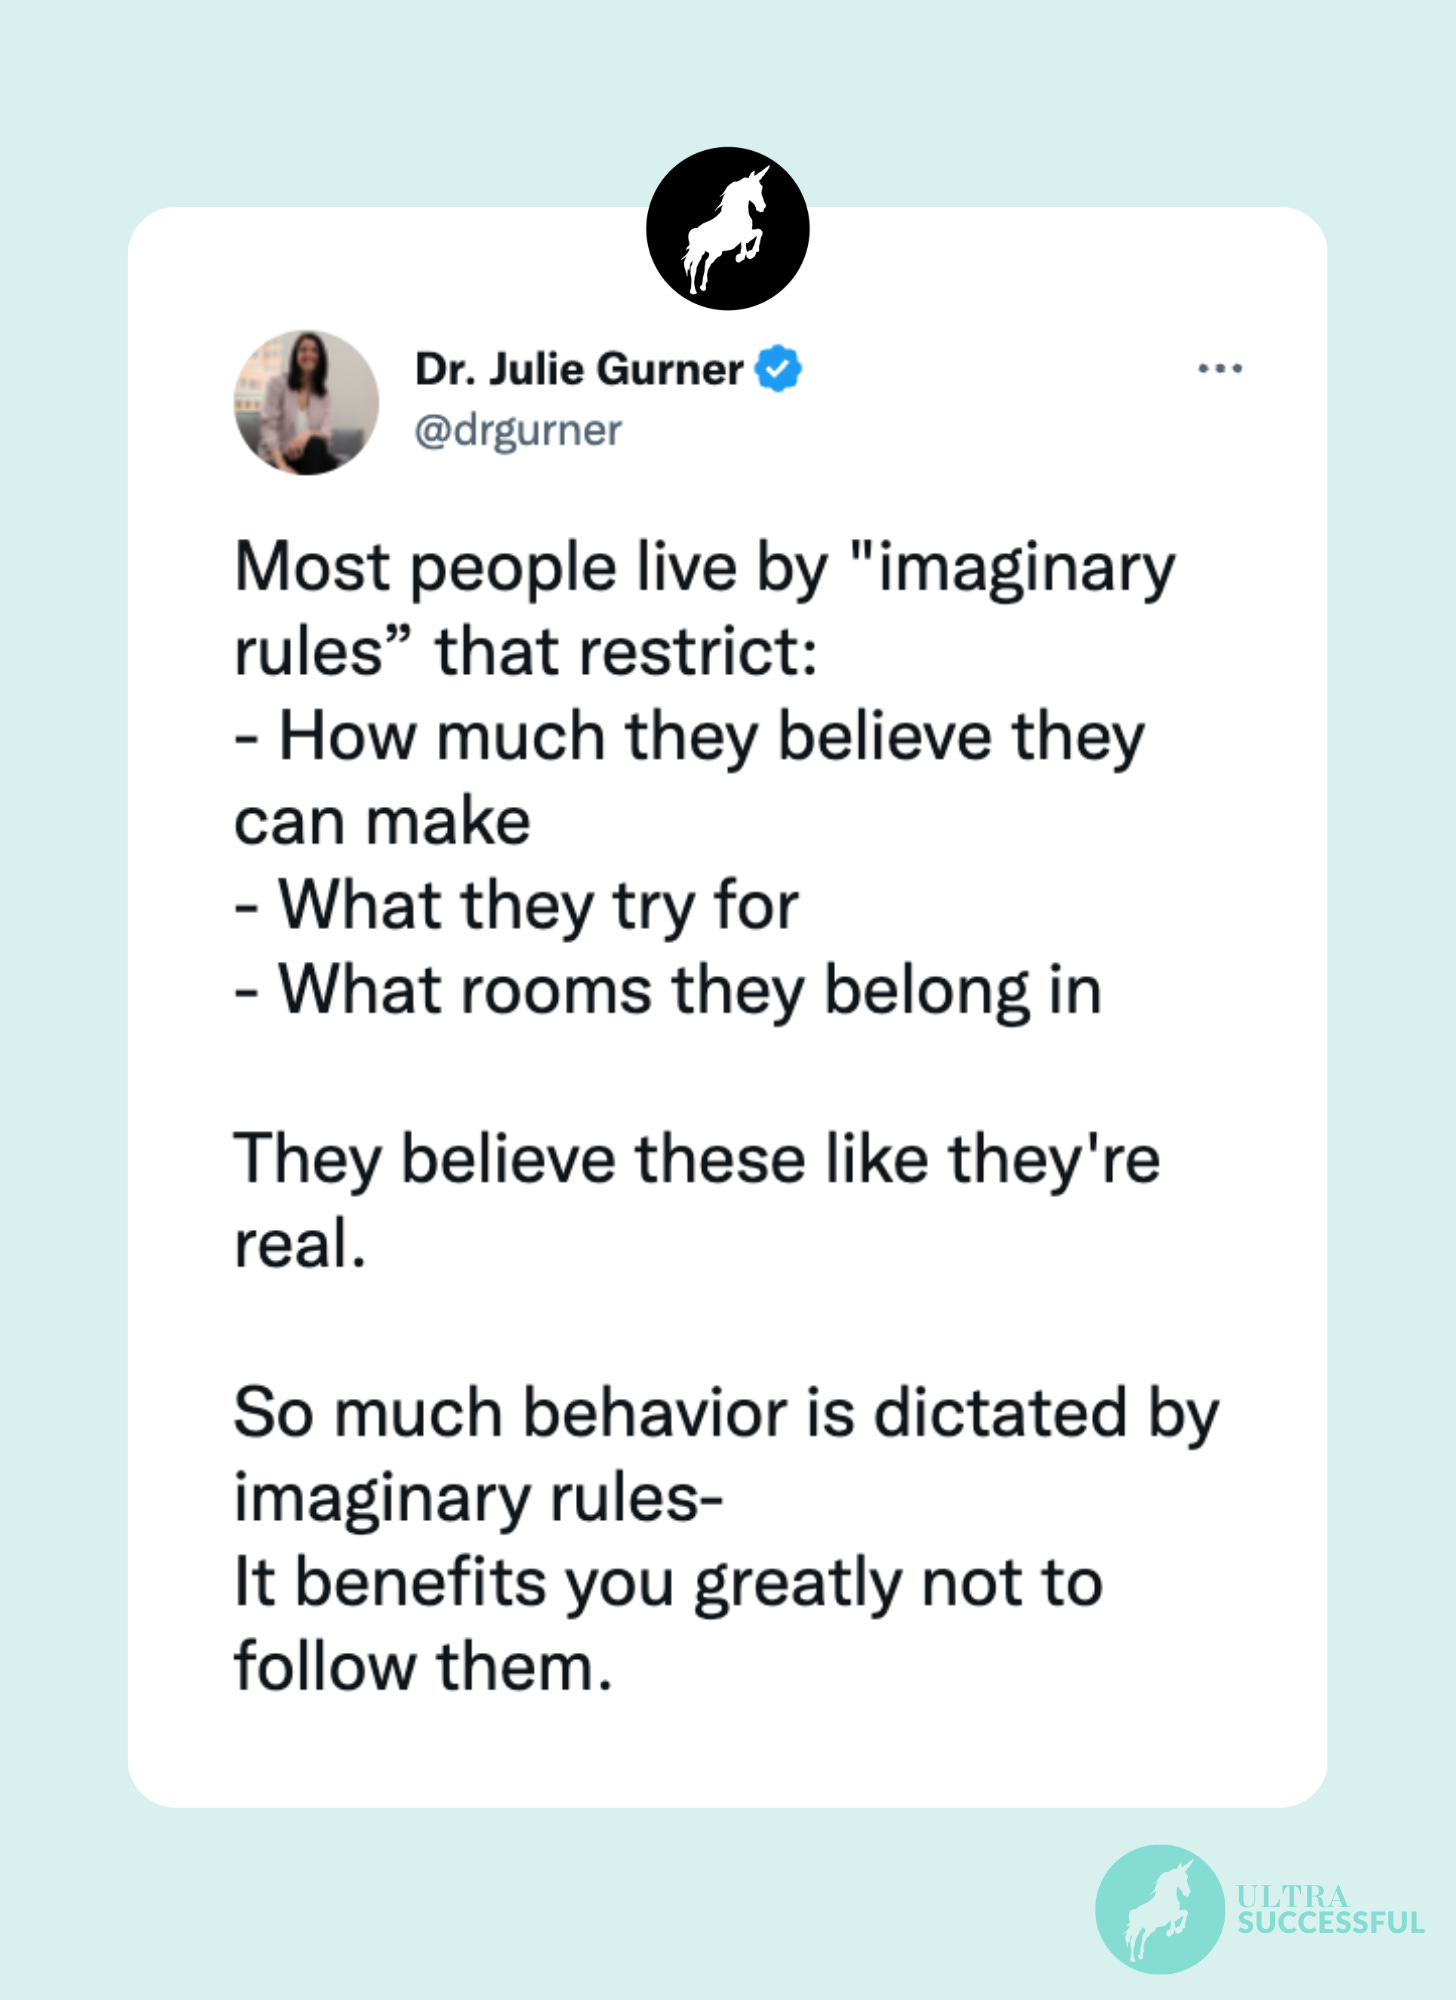 @drgurner: Most people live by "imaginary rules” that restrict: - How much they believe they can make - What they try for - What rooms they belong in  They believe these like they're real.  So much behavior is dictated by imaginary rules- It benefits you greatly not to follow them.